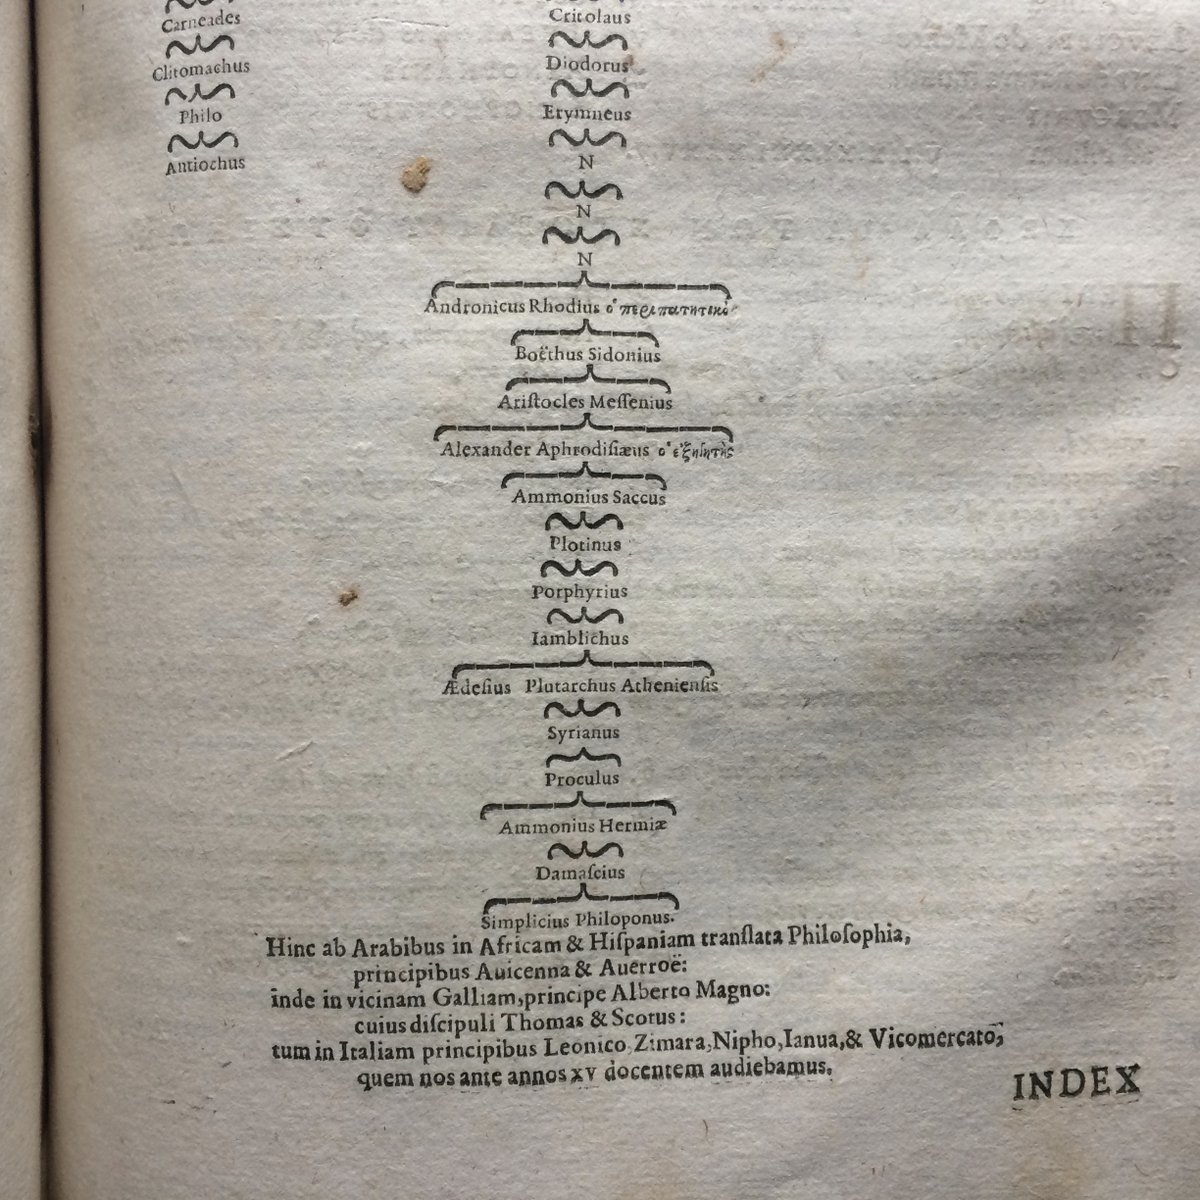 A genealogy of ancient philosophy by the 16th century humanist Willem Canter, included in his edition of Stobaeus: